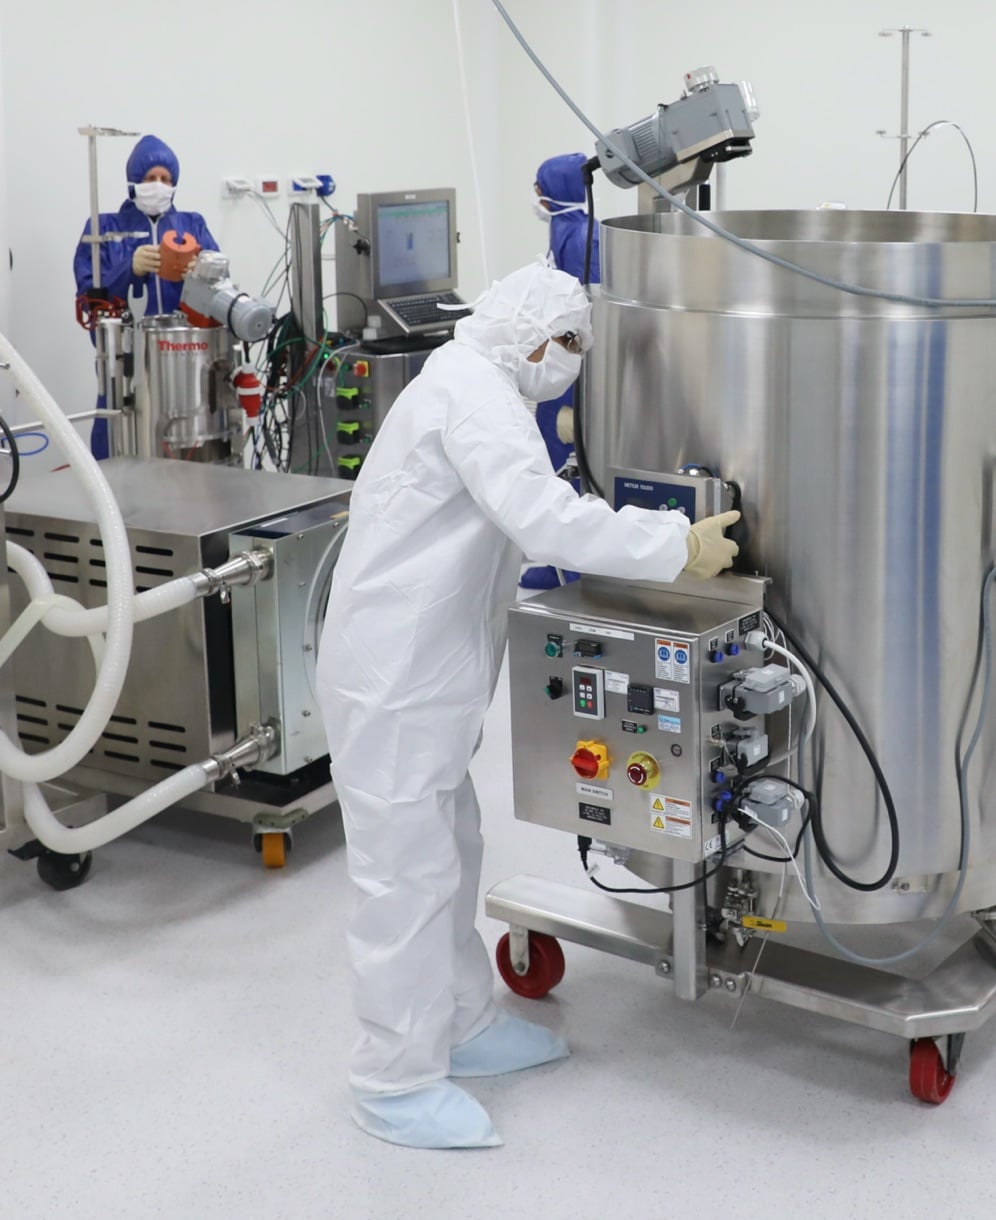 VBL production technicians in blue and white lab hoodies standing next to large stainless steel bioreactors in a clean room.